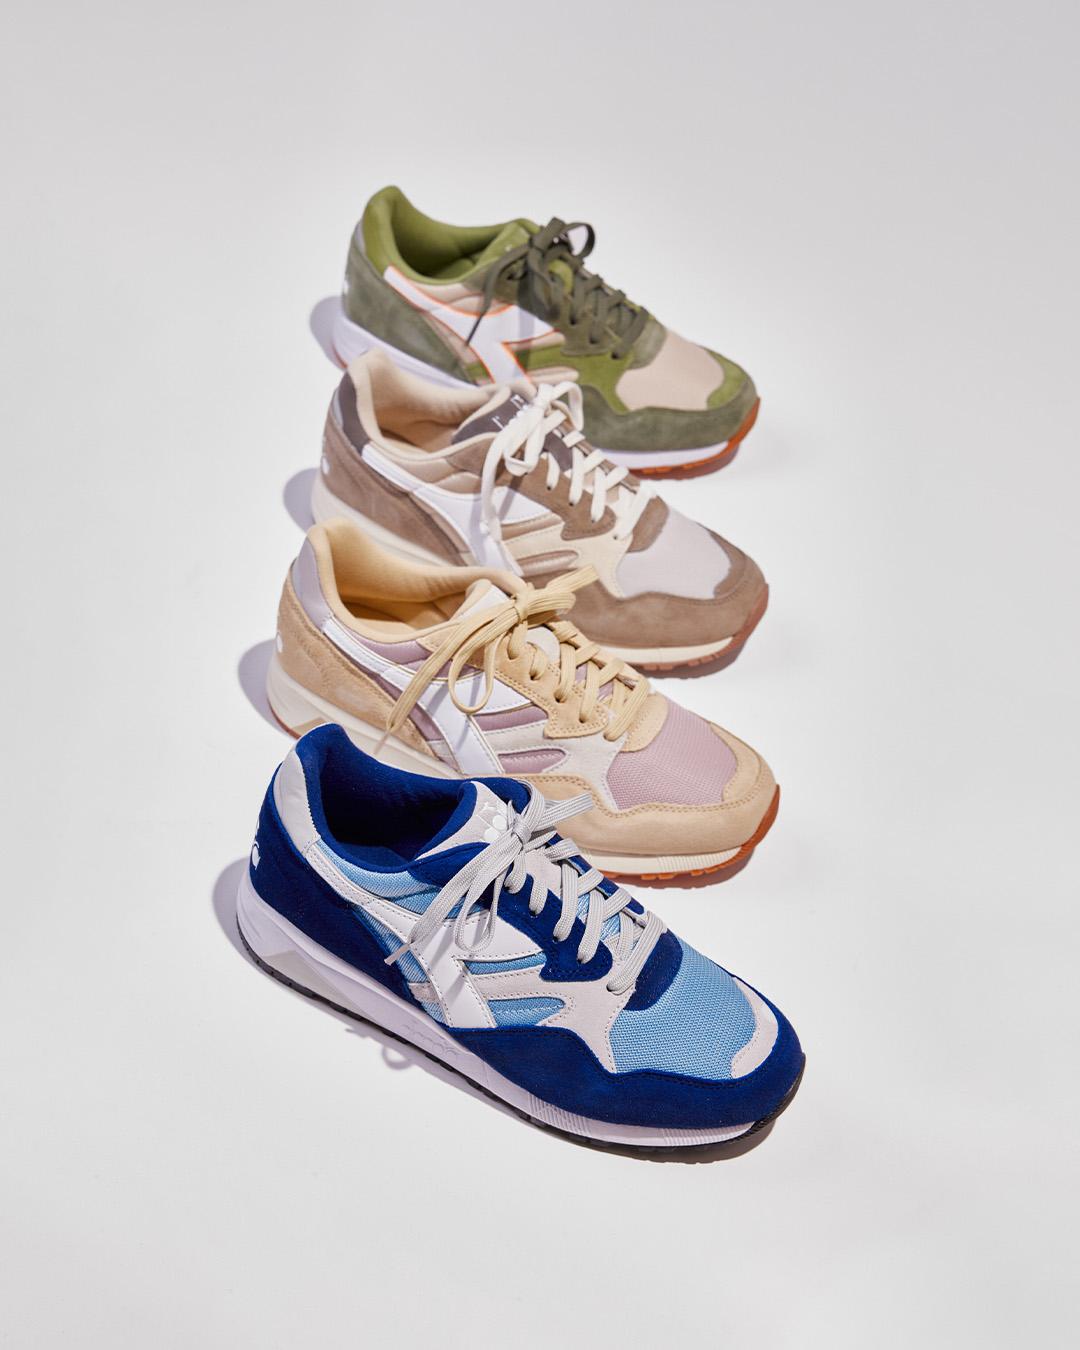 Heup Trojaanse paard taart Sneakers, Culture & Community | Trainers at OFFSPRING